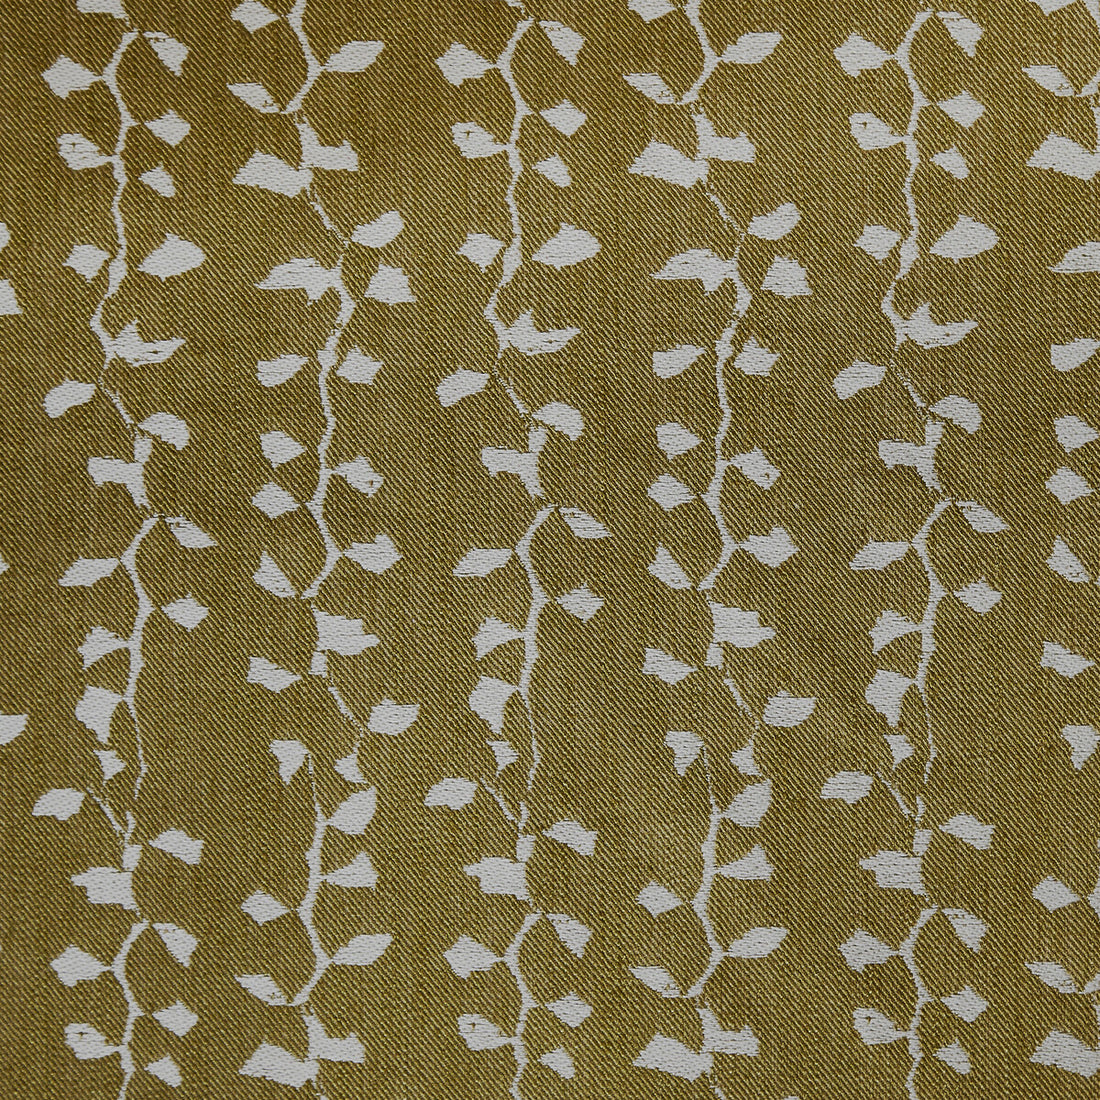 Jungle fabric in meadow color - pattern GWF-3203.23.0 - by Lee Jofa Modern in the Allegra Hicks Islands collection